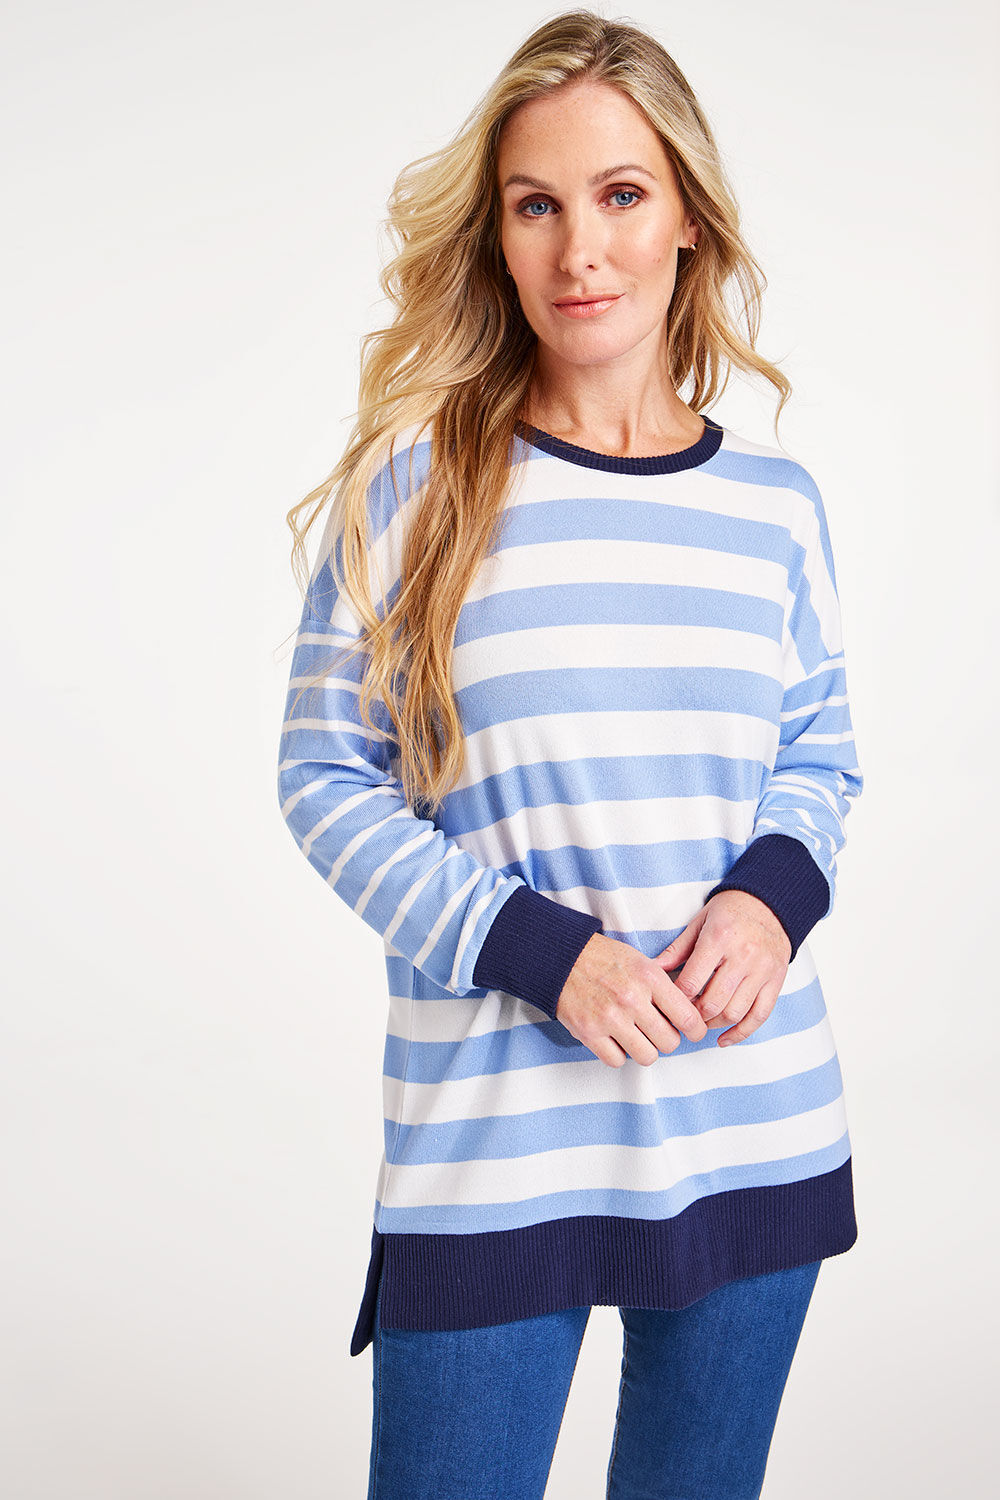 Bonmarche Blue Long Sleeve Striped Soft Touch Tunic, Size: 14